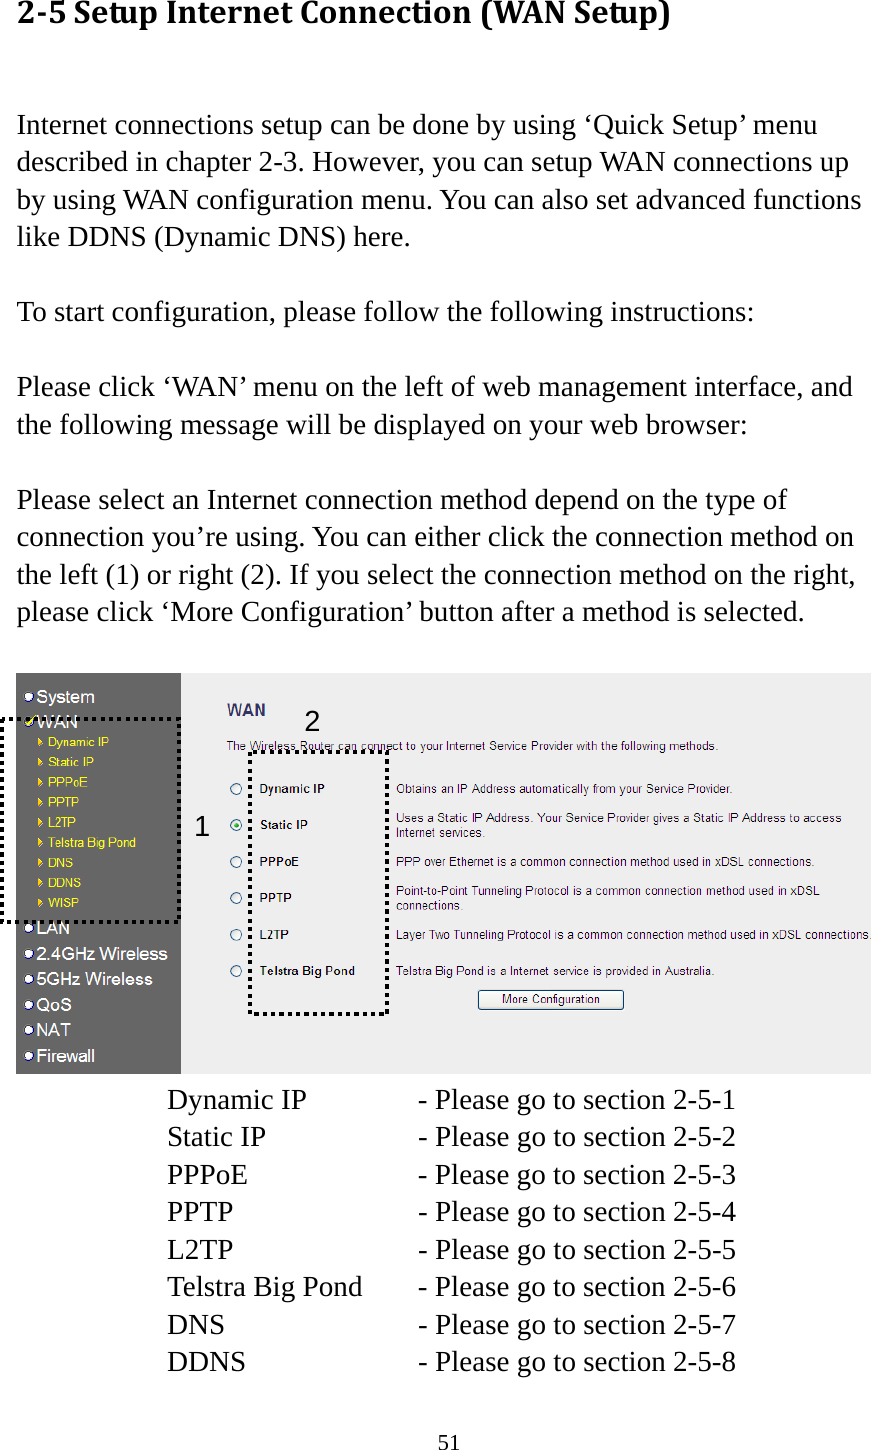 51 25SetupInternetConnection(WANSetup) Internet connections setup can be done by using ‘Quick Setup’ menu described in chapter 2-3. However, you can setup WAN connections up by using WAN configuration menu. You can also set advanced functions like DDNS (Dynamic DNS) here.  To start configuration, please follow the following instructions:  Please click ‘WAN’ menu on the left of web management interface, and the following message will be displayed on your web browser:  Please select an Internet connection method depend on the type of connection you’re using. You can either click the connection method on the left (1) or right (2). If you select the connection method on the right, please click ‘More Configuration’ button after a method is selected.   Dynamic IP     - Please go to section 2-5-1 Static IP       - Please go to section 2-5-2 PPPoE        - Please go to section 2-5-3 PPTP        - Please go to section 2-5-4 L2TP        - Please go to section 2-5-5 Telstra Big Pond   - Please go to section 2-5-6 DNS        - Please go to section 2-5-7 DDNS        - Please go to section 2-5-8 12